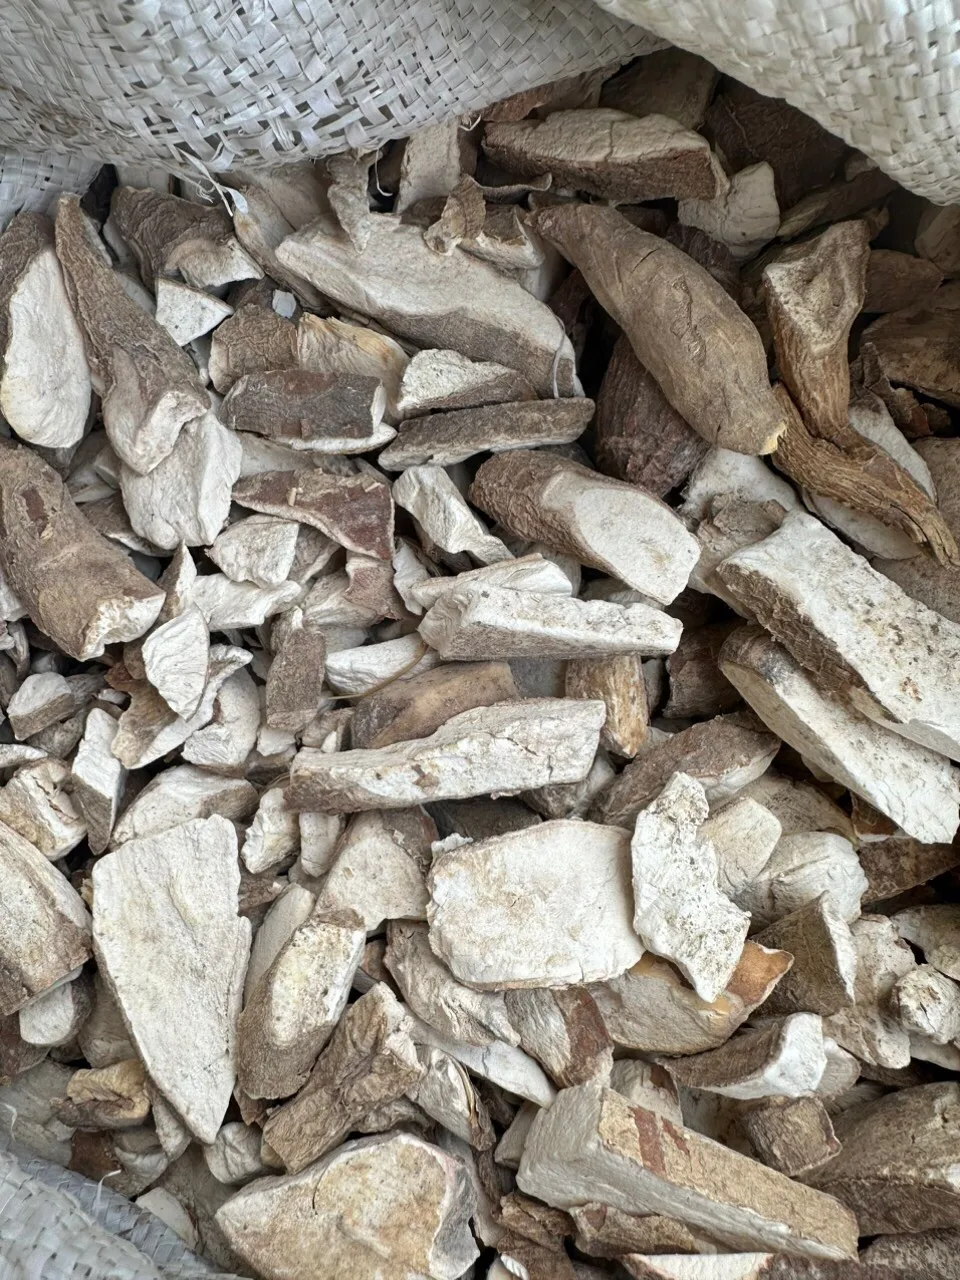 For Sale Reasonable Price Cassava Chips Sliced Cassava For Feeding Animal Making Animal Food Ready To Export In Bulk